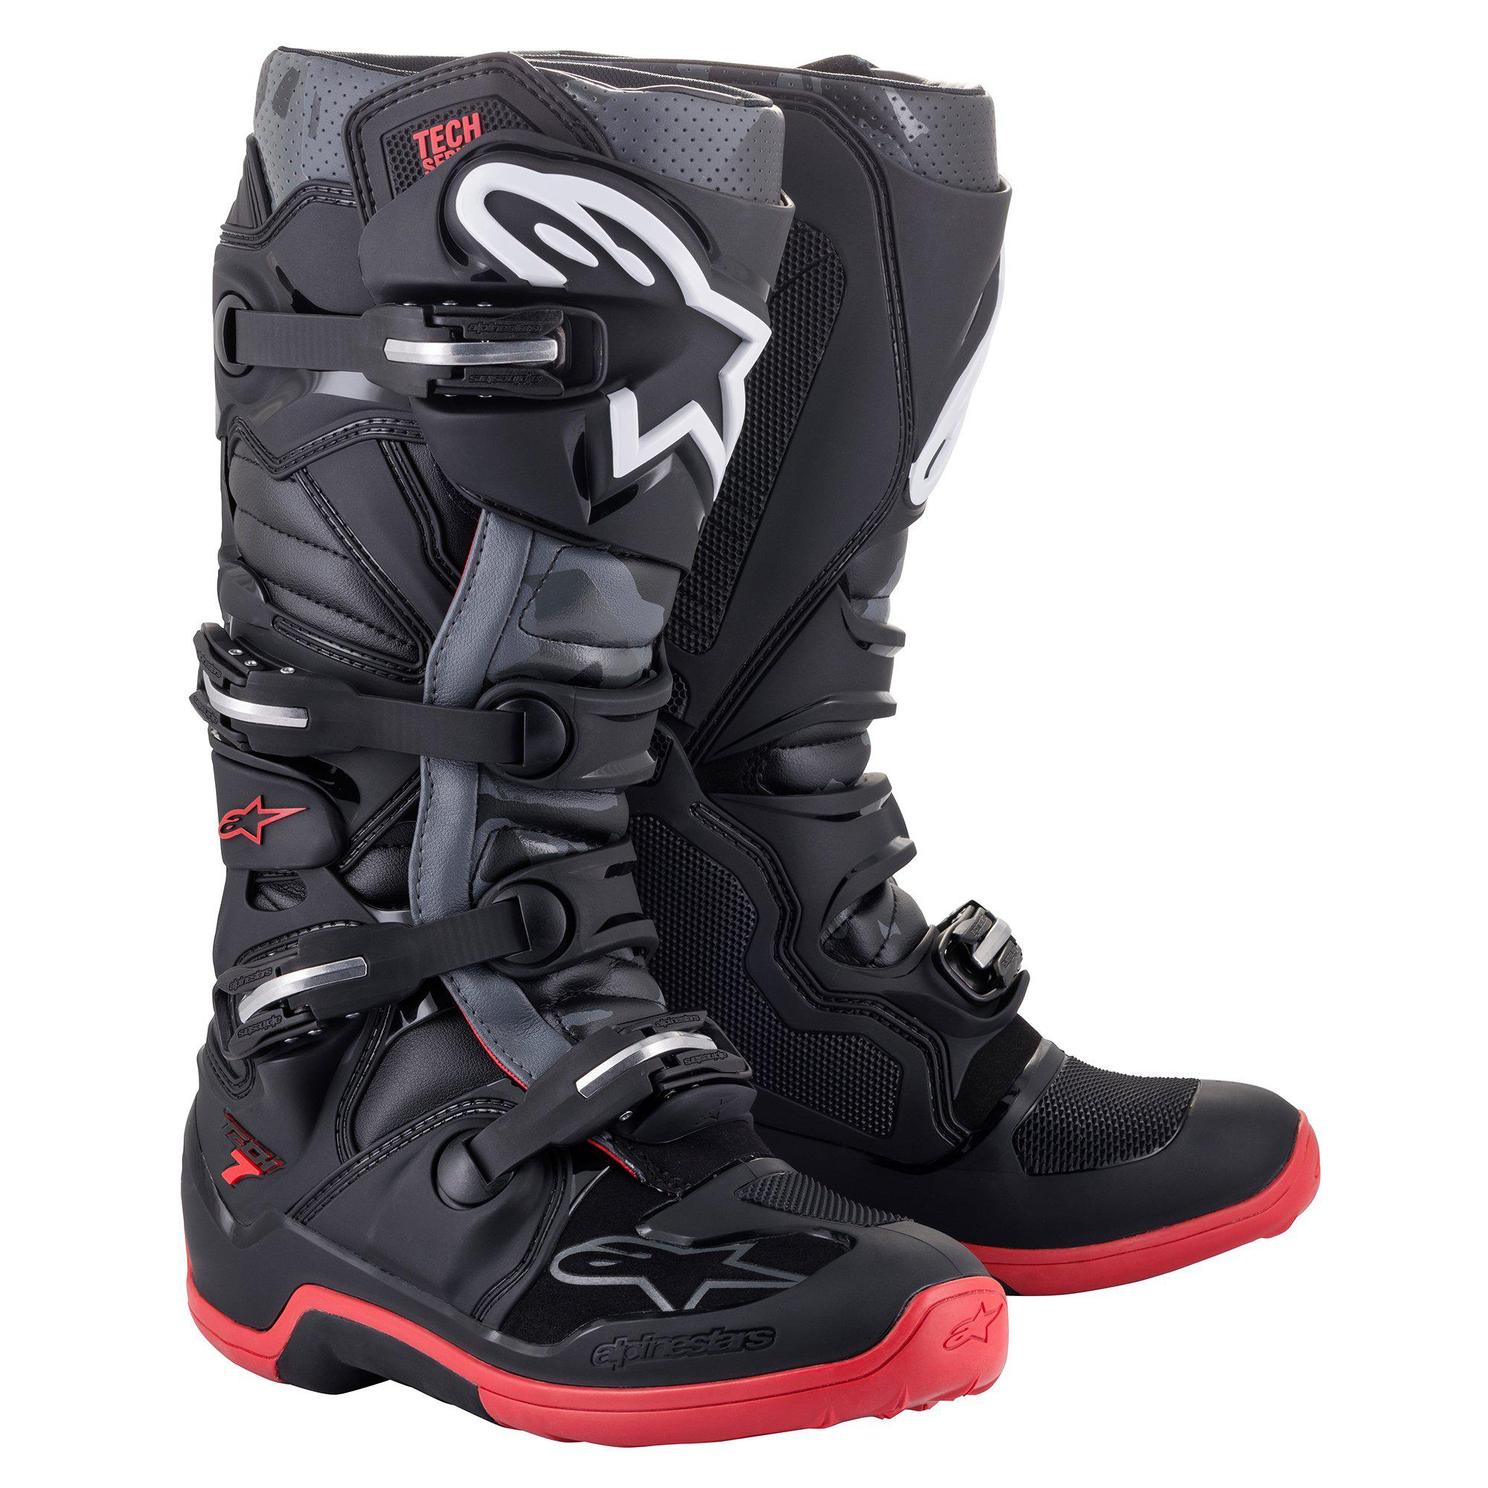 Alpinestars Tech 7 MX Boot Removable Footbed Inserts Mens Size 5-15 